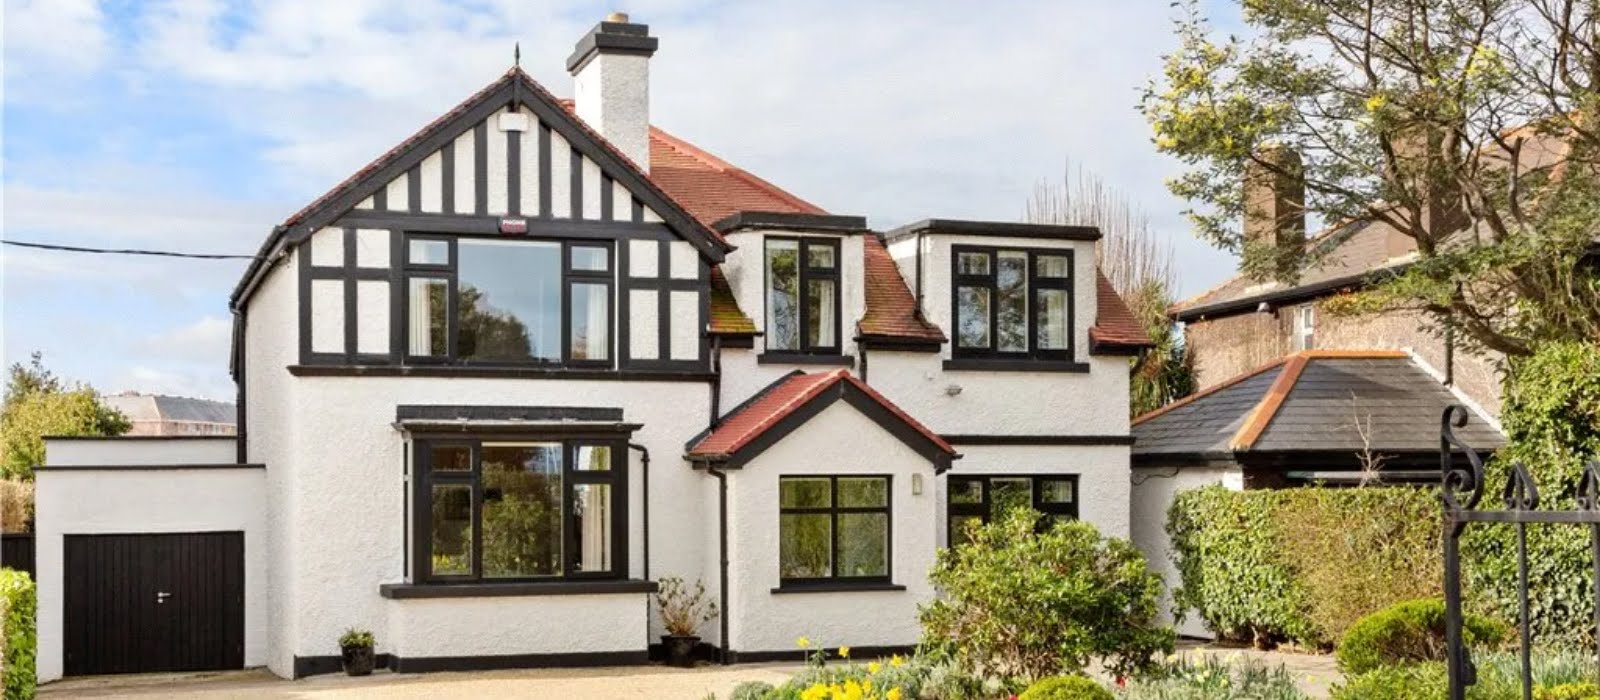 This seaside home in Sandymount is on the market for €2.5 million